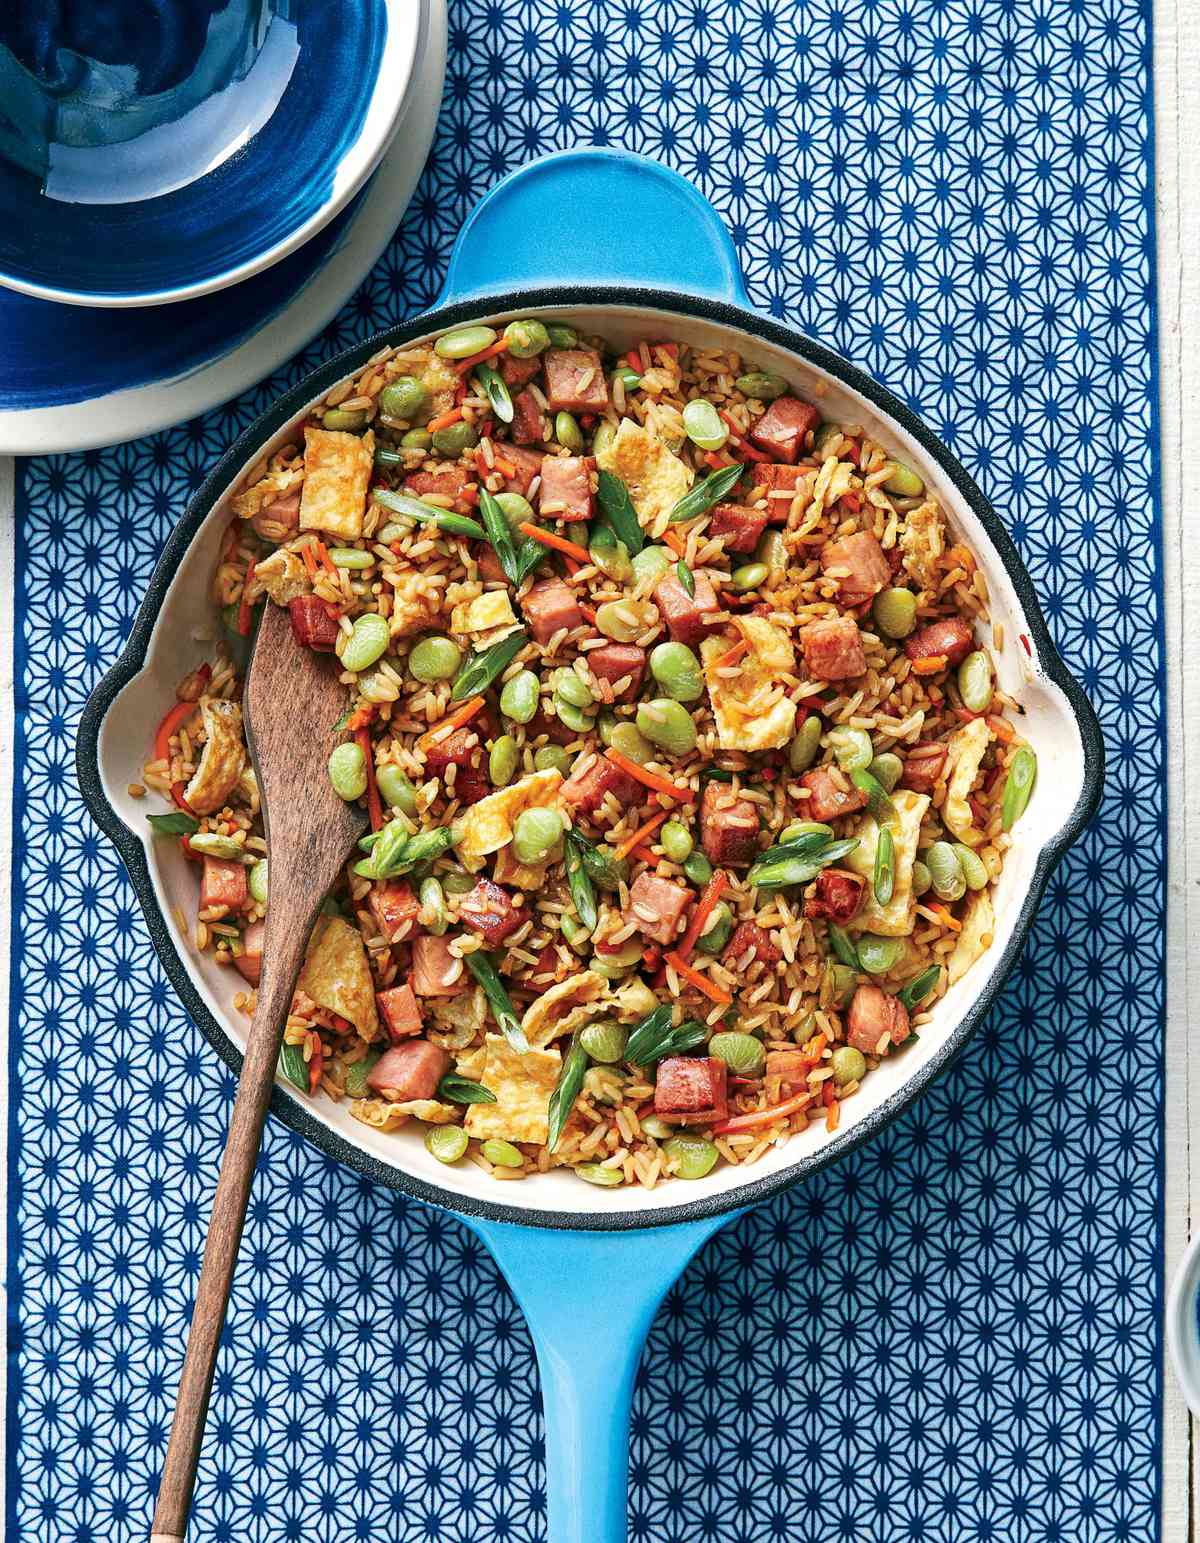 April: Ham and Lima Bean Fried Rice